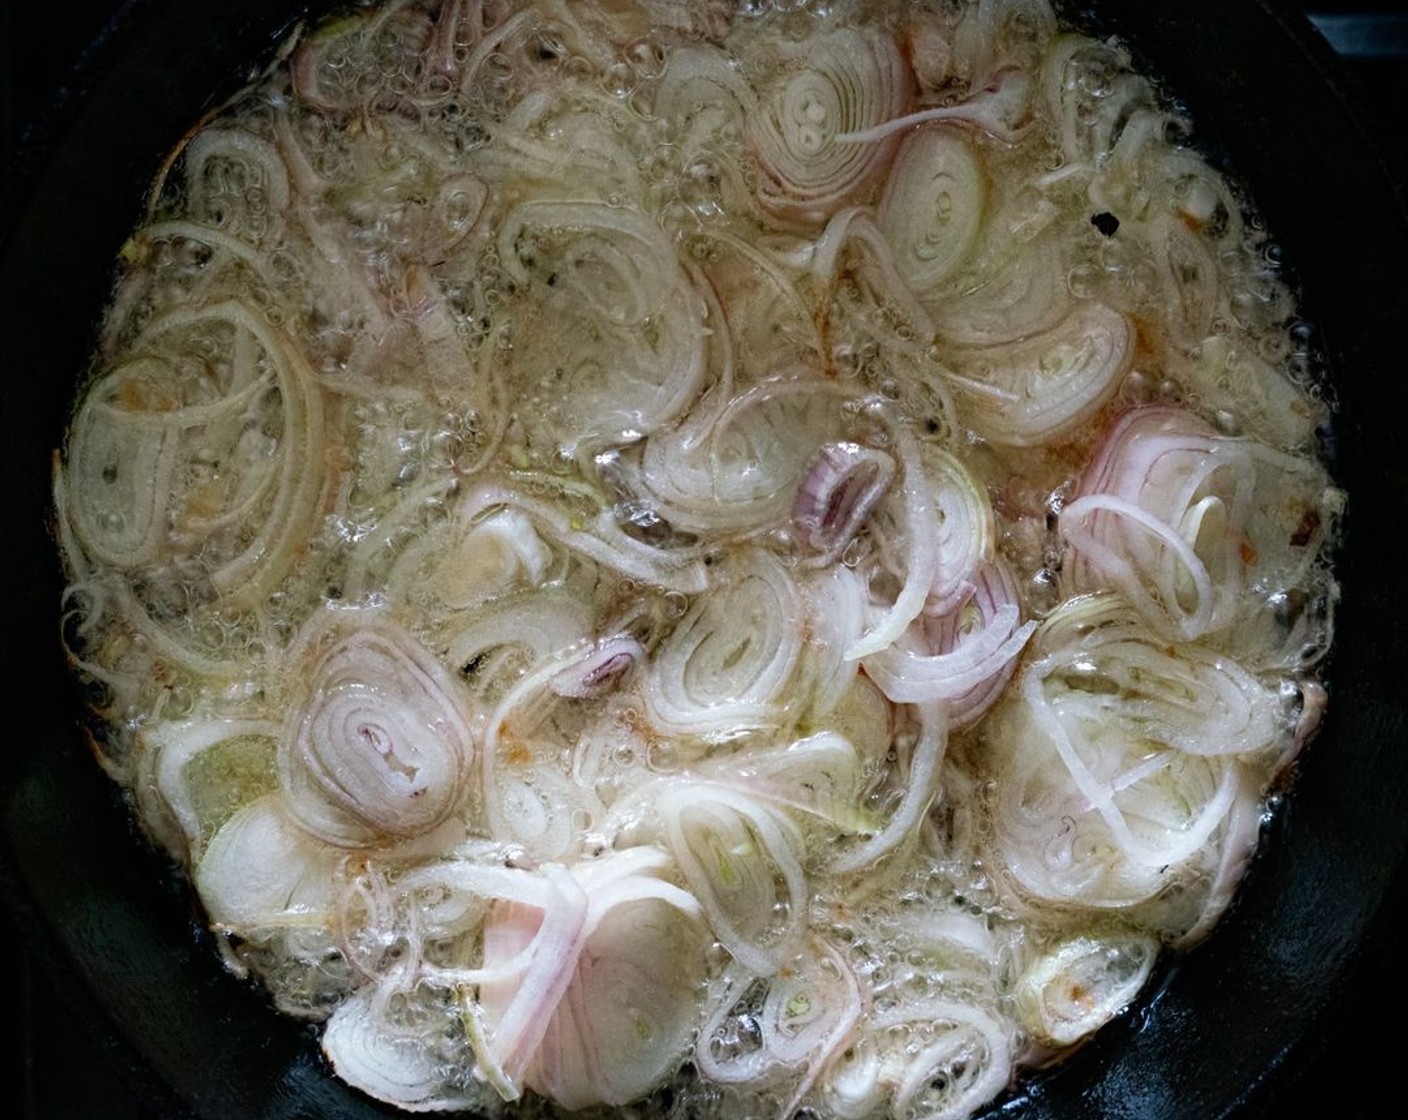 step 4 In the frying pan, heat the Vegetable Oil (1/4 cup) over medium heat. Add the Onion (1) and sauté until translucent and lightly golden, 7-10 minutes.